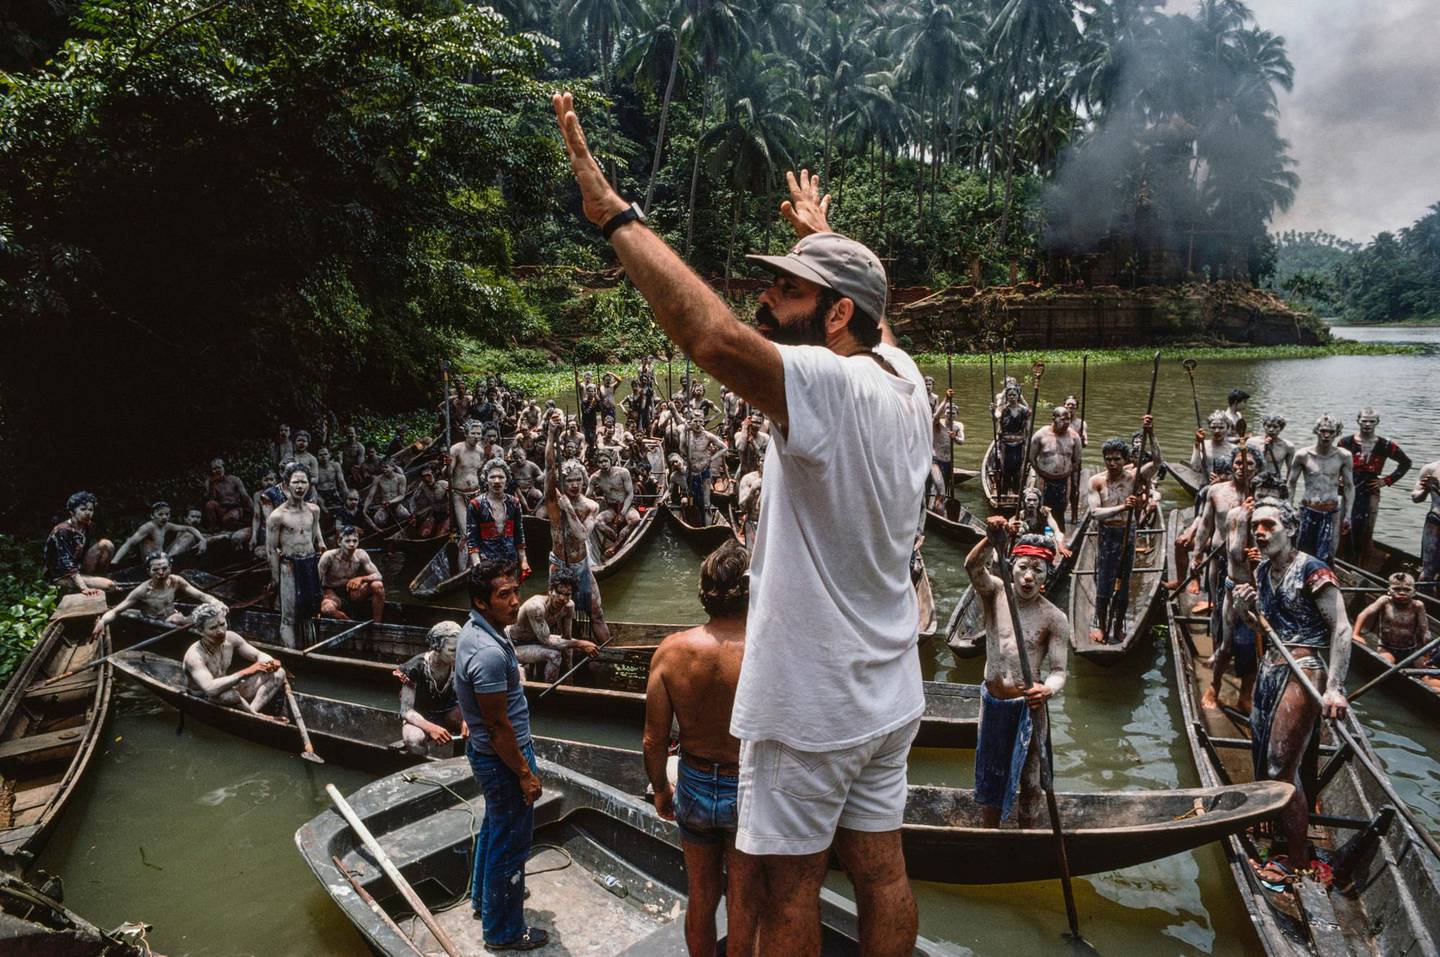 This image provided by Zoetrope Corp. shows director Francis Ford Coppola on location directing a scene in "Apocalypse Now Final Cut." The movie releases in theaters on Aug. 15. (Chas Gerretsen/Nederlands Fotomuseum/Zoetrope Corp. via AP)